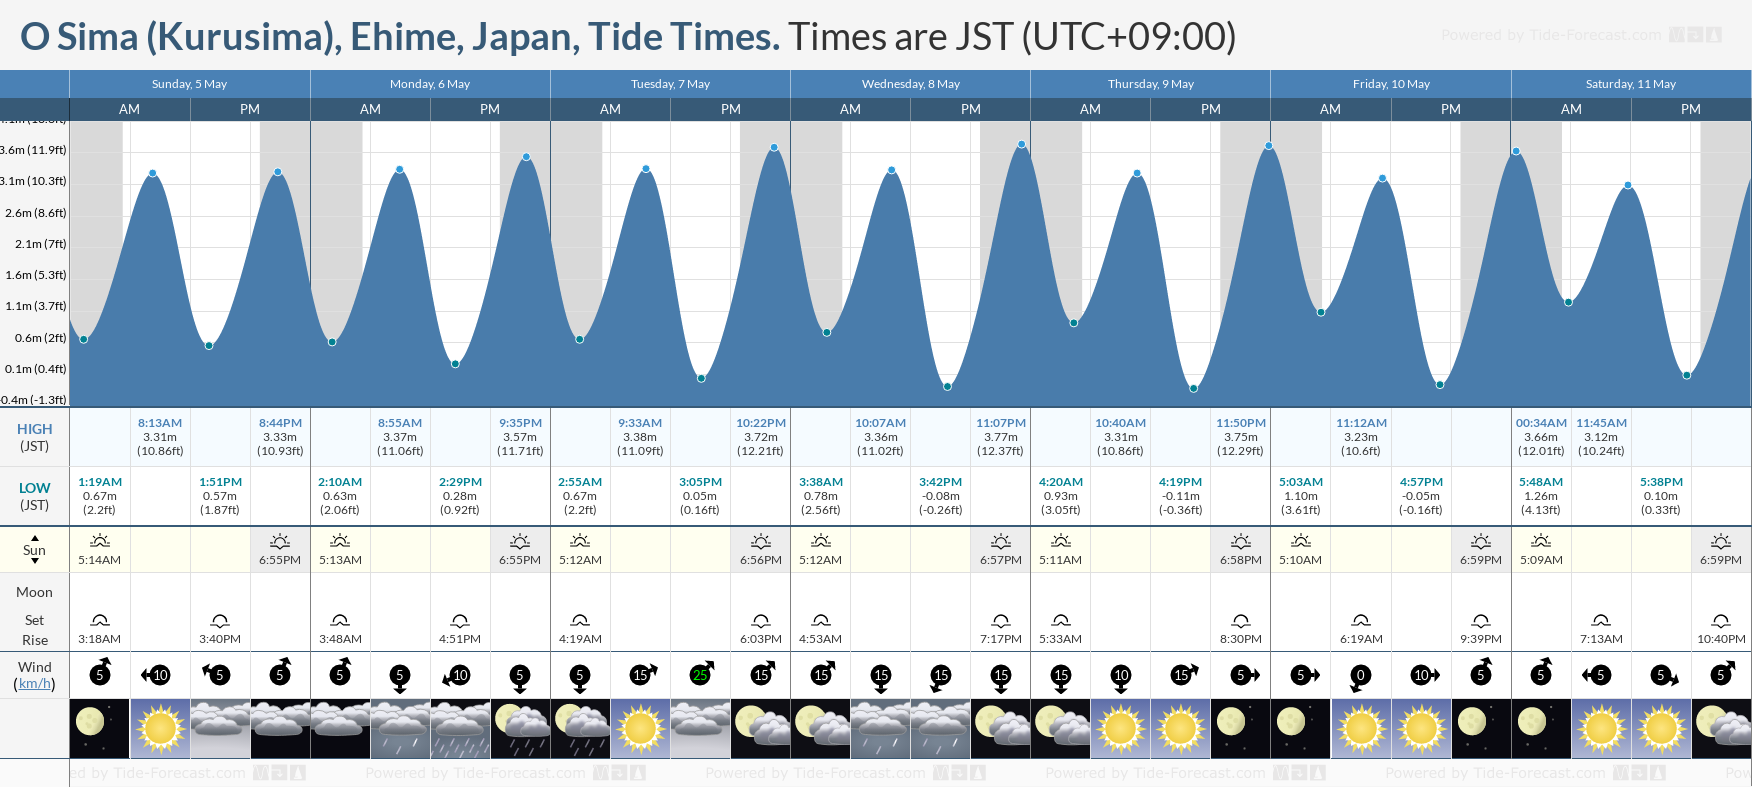 O Sima (Kurusima), Ehime, Japan Tide Chart including high and low tide times for the next 7 days